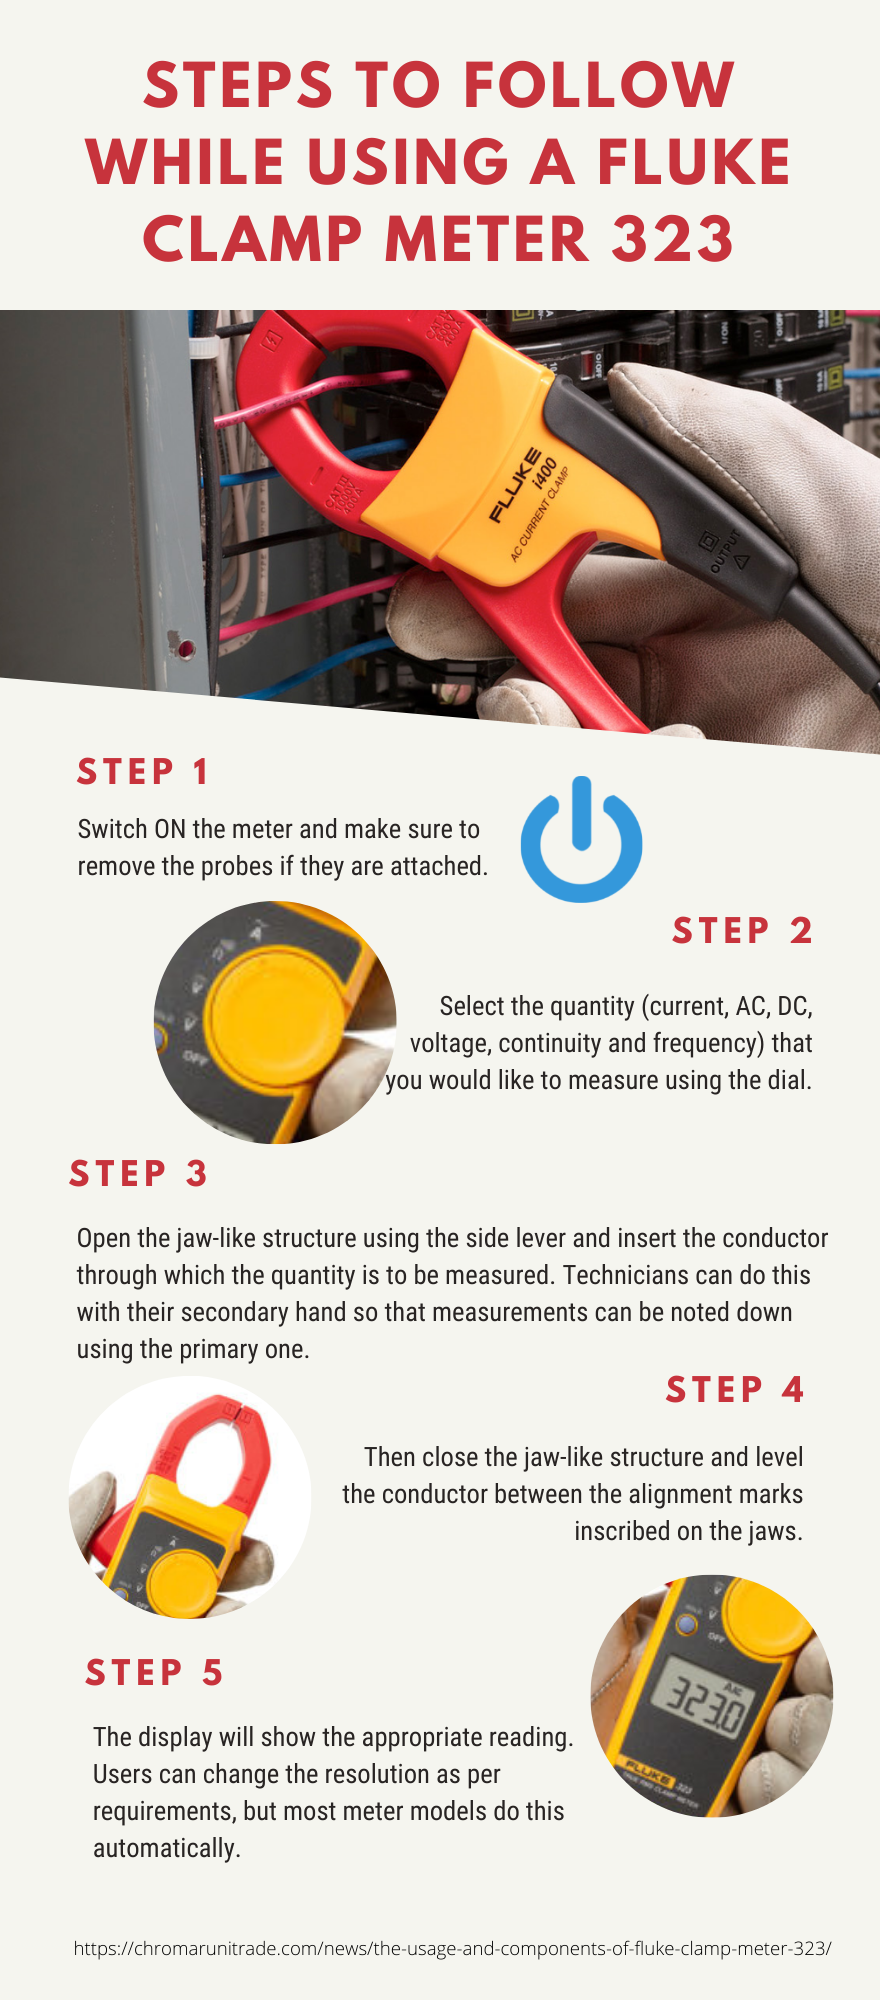 Steps to Follow While Using a Fluke Clamp Meter 323